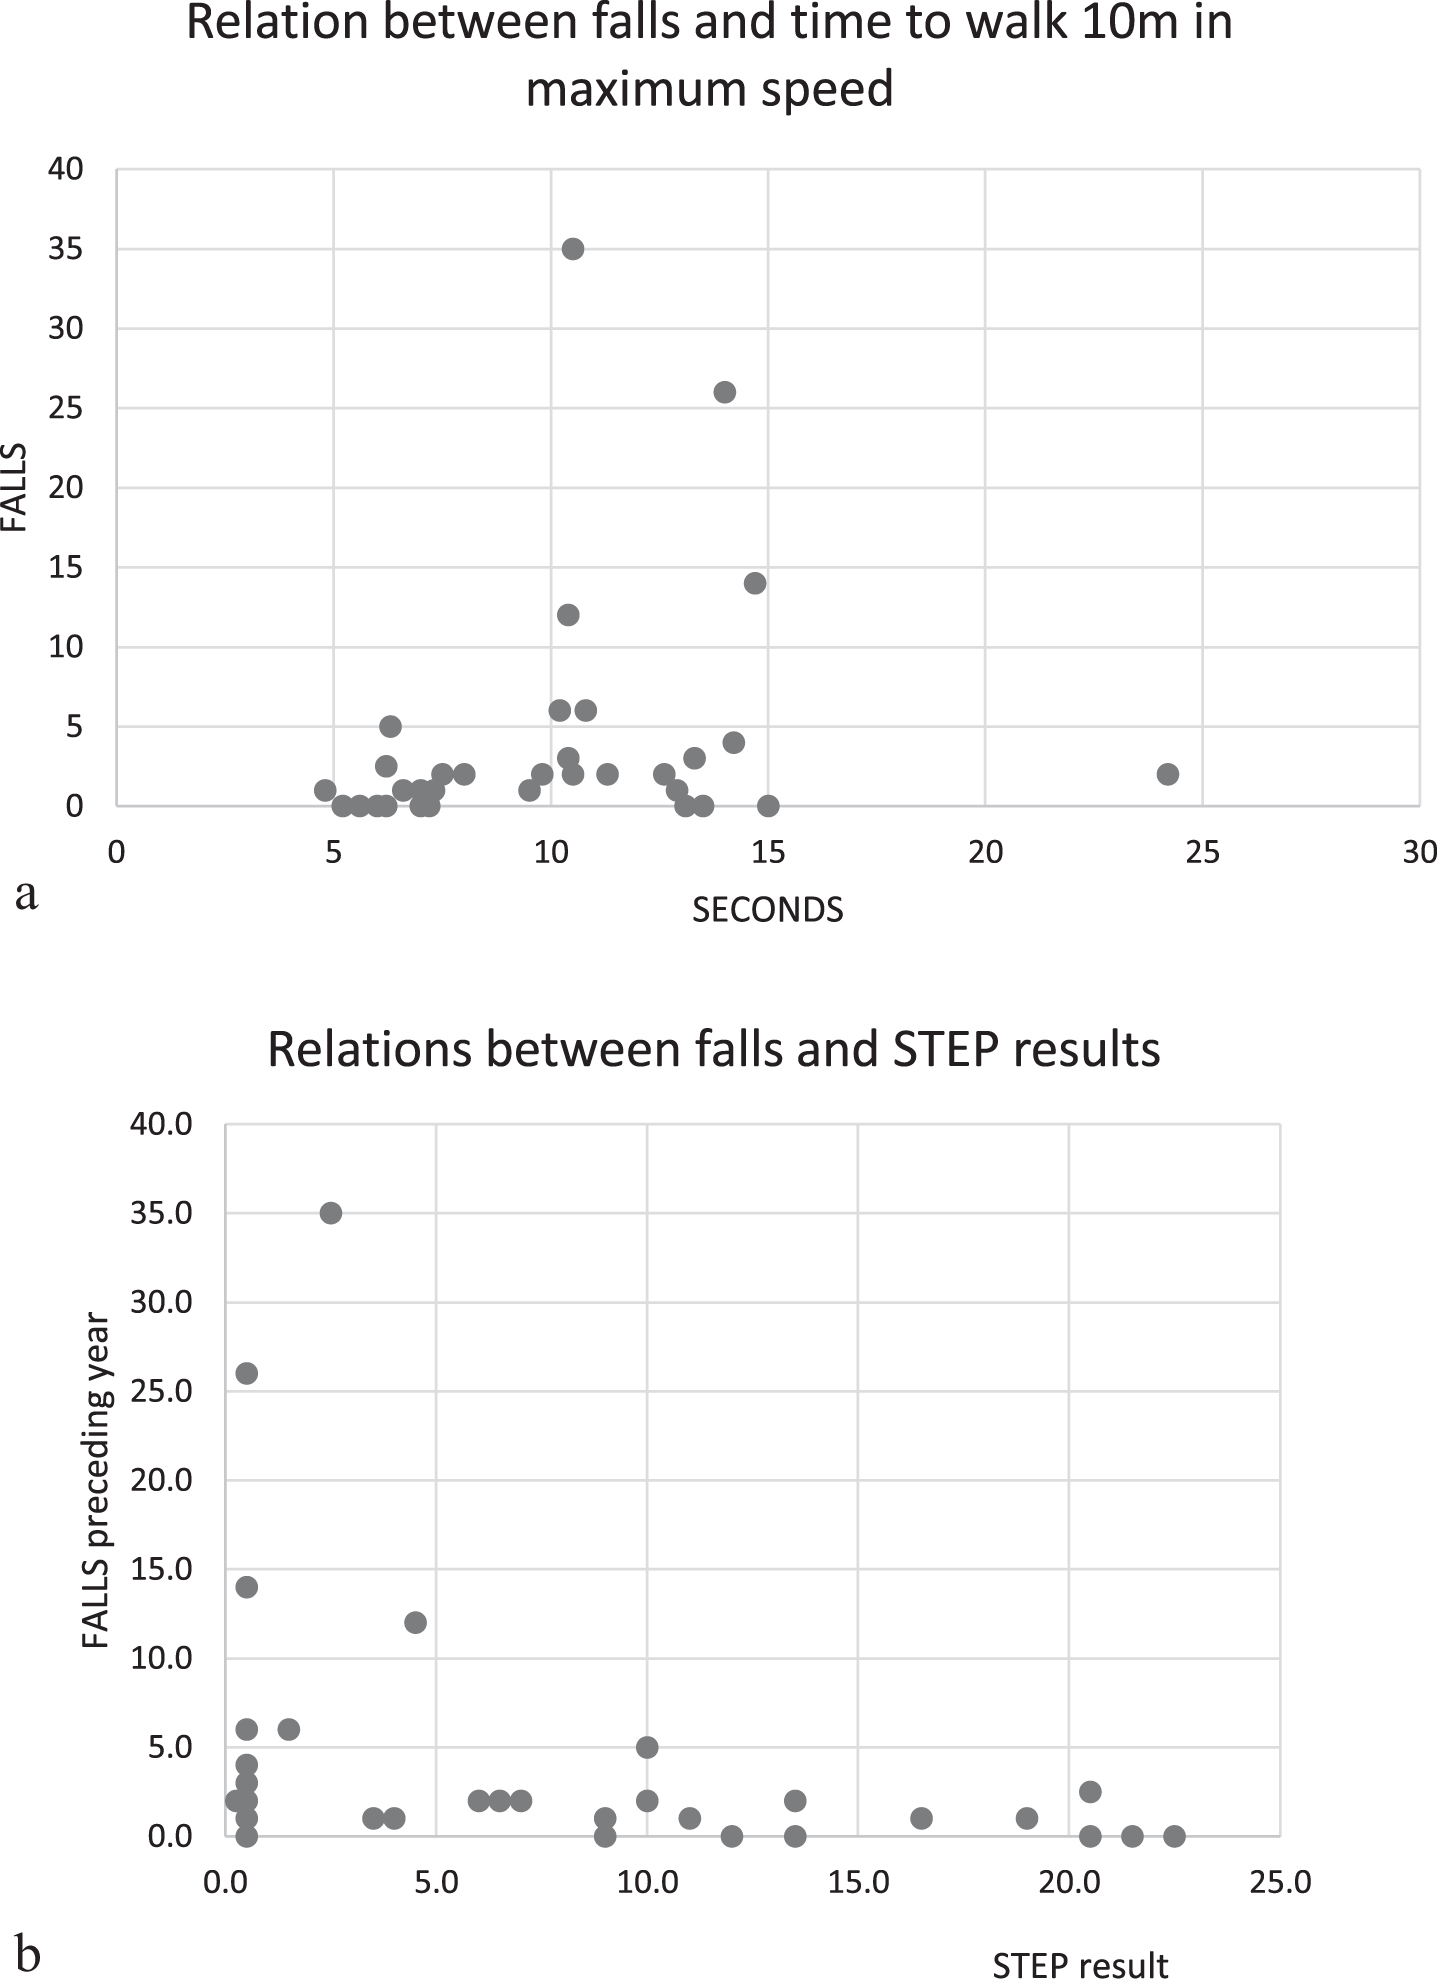 Scatterplots showing the number of patient-reported unintentional falls the year preceding the 10-year assessment in relation to: a) Timed 10 m walk in maximum speed, frequent fallers were seen among those who walked 10 meters on a time surpassing 10 seconds (frequent faller defined as having more than five unintentional falls the preceding year). b) The performed number of steps in STEP test at 10-year assessment. Frequent fallers were only seen among those with less than 5 steps in STEP test.